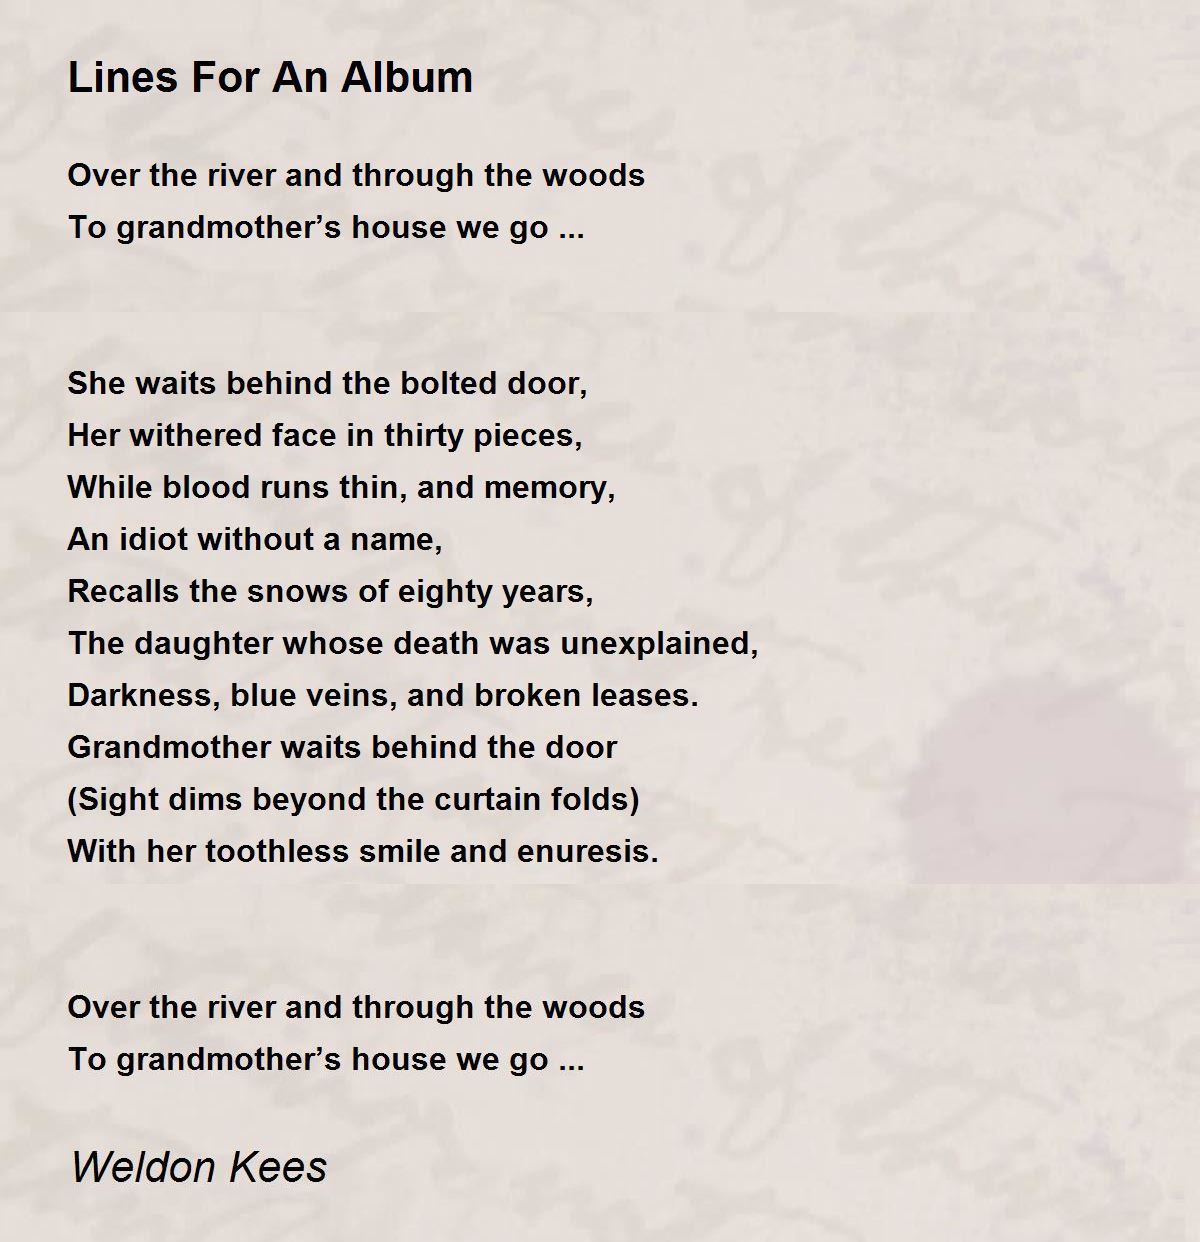 Lines For An Album - Lines For An Album Poem by Weldon Kees